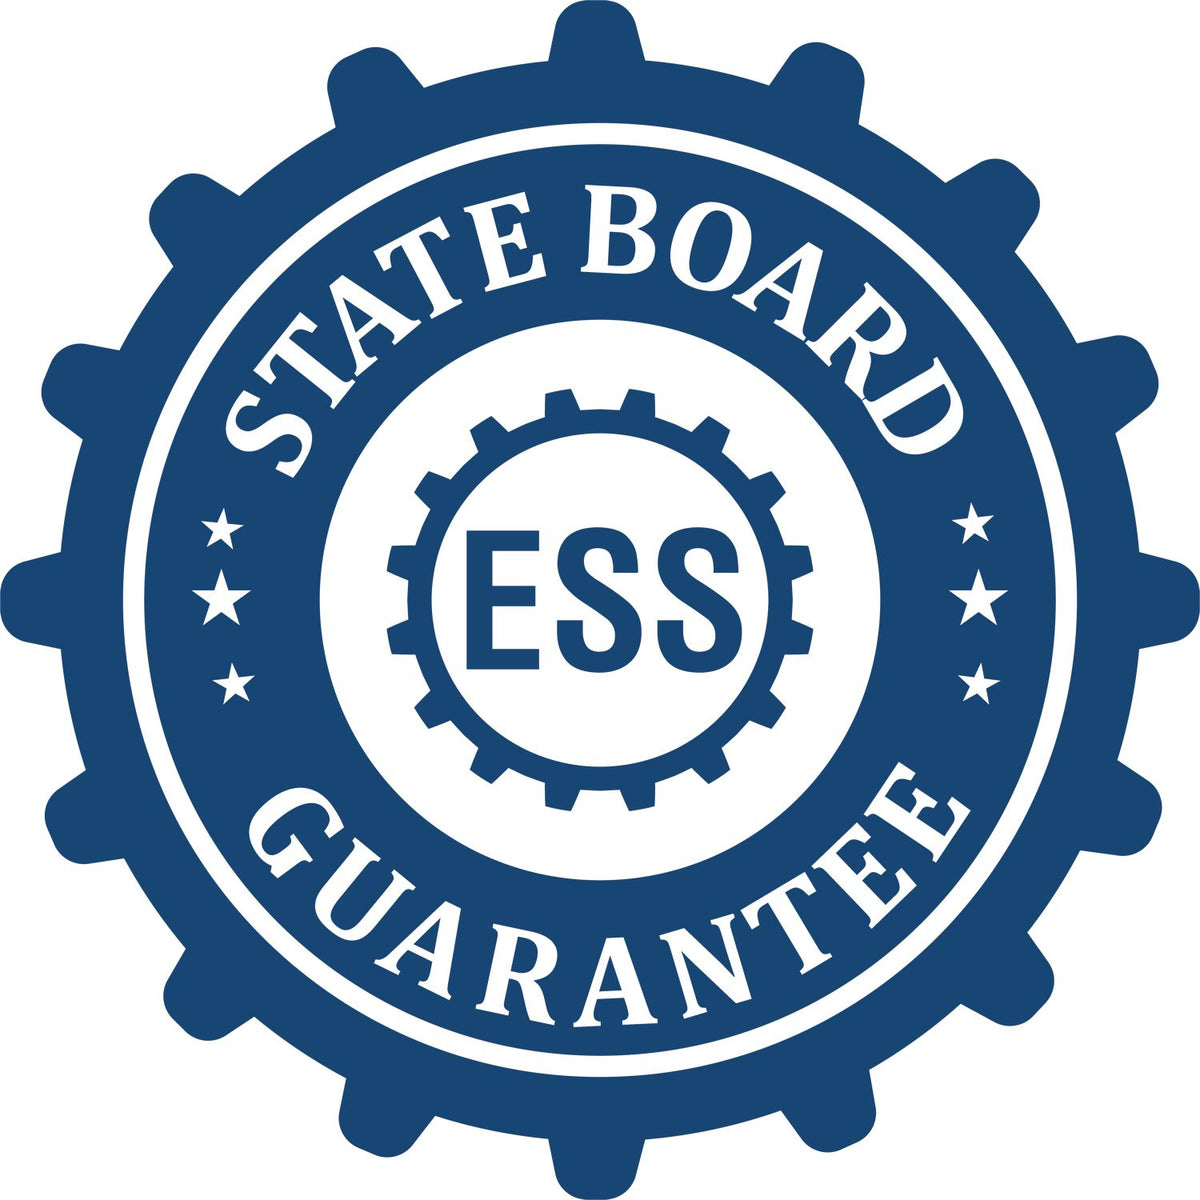 An emblem in a gear shape illustrating a state board guarantee for the Pennsylvania Desk Architect Embossing Seal product.